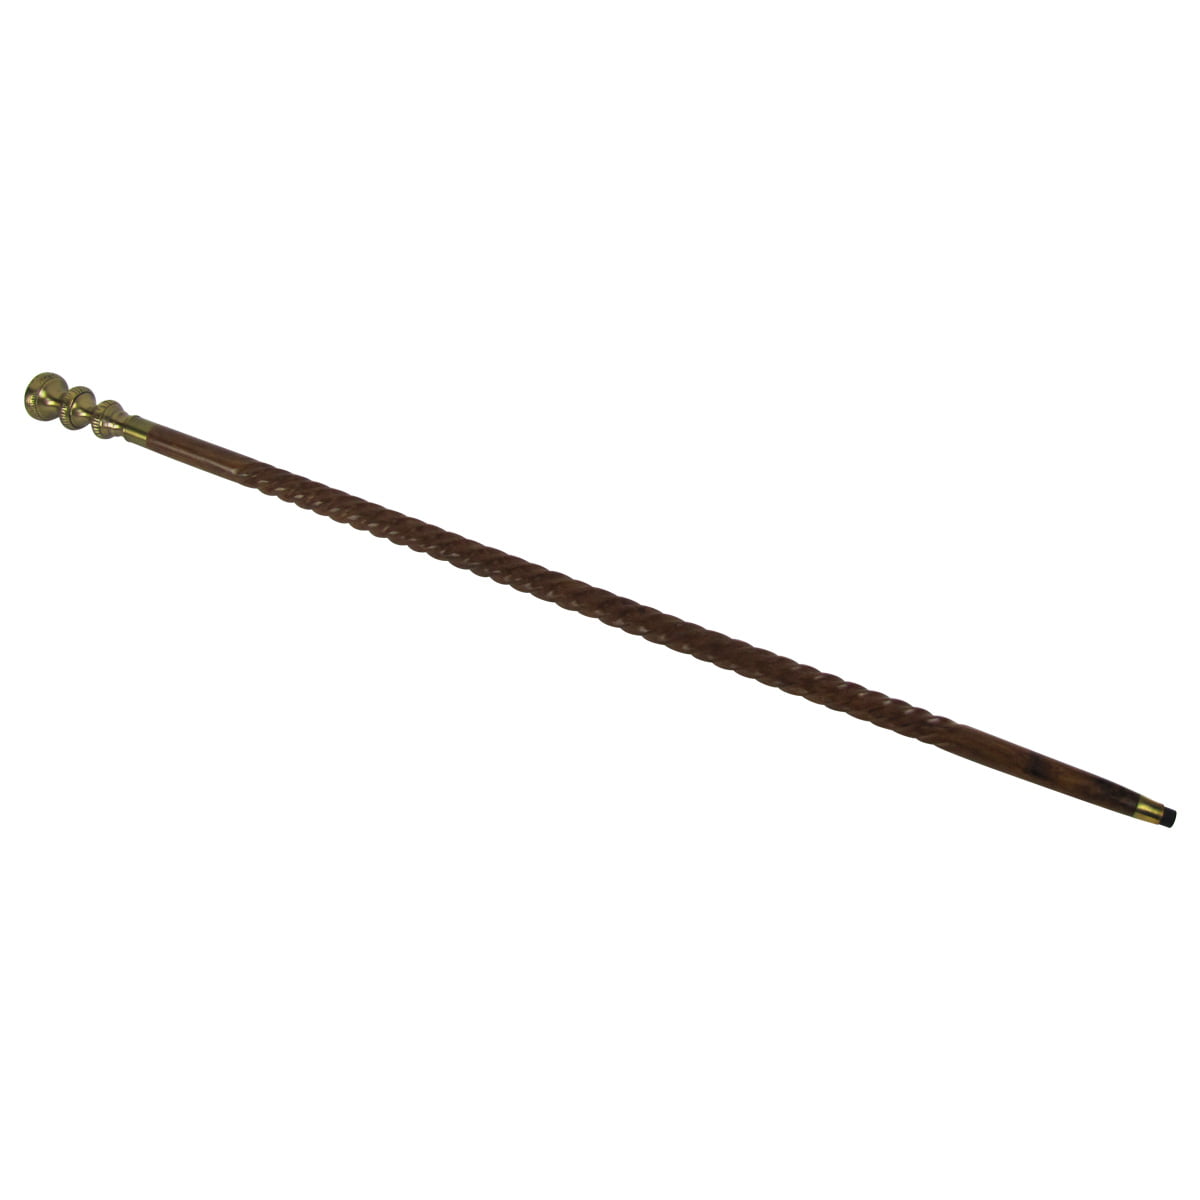 WOODEN WALKING STICK WITH BRASS KNOB ~ BLACK WOOD WALKING CANE WITH BRASS HANDLE 